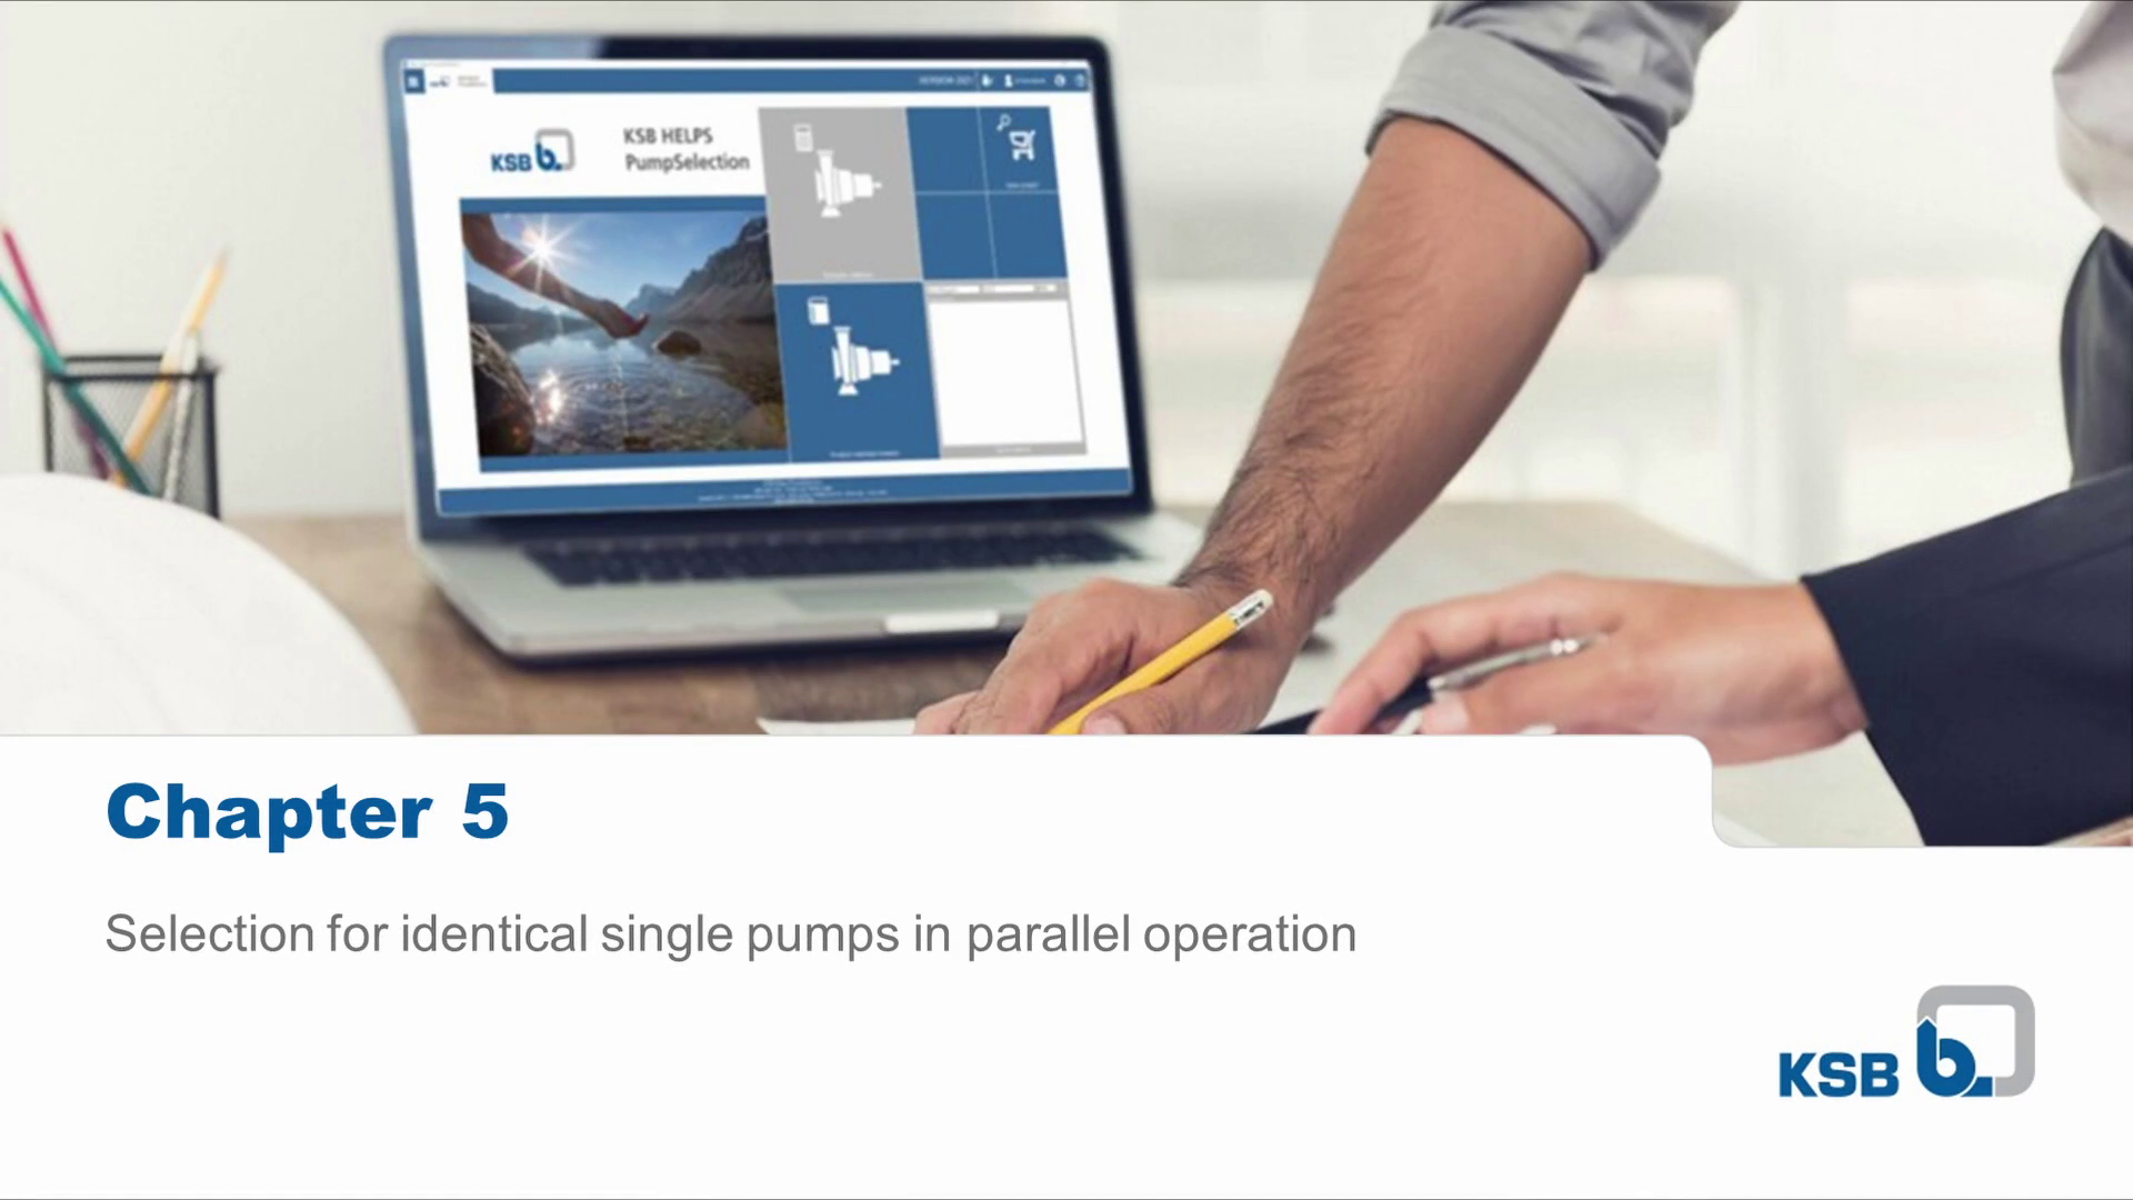 Tutorial KSB HELPS PumpSelection, Chapter 5: Selection for identical single pumps in parallel operation